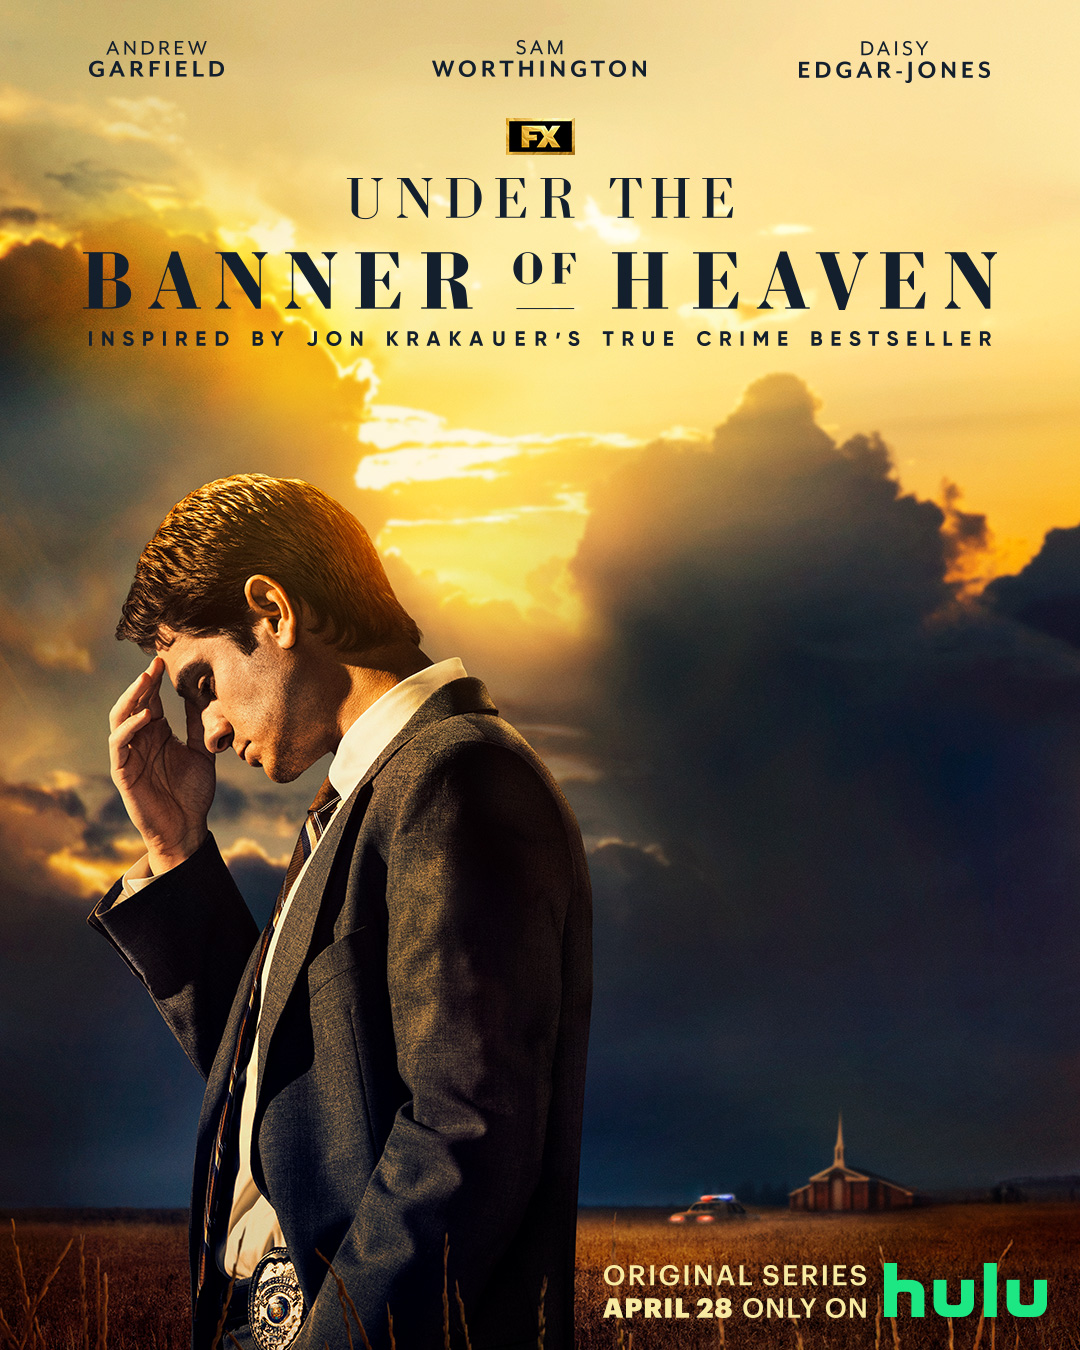 Under the Banner of Heaven Season 1 Episode 3: Release date, promo, plot, cast, and other updates